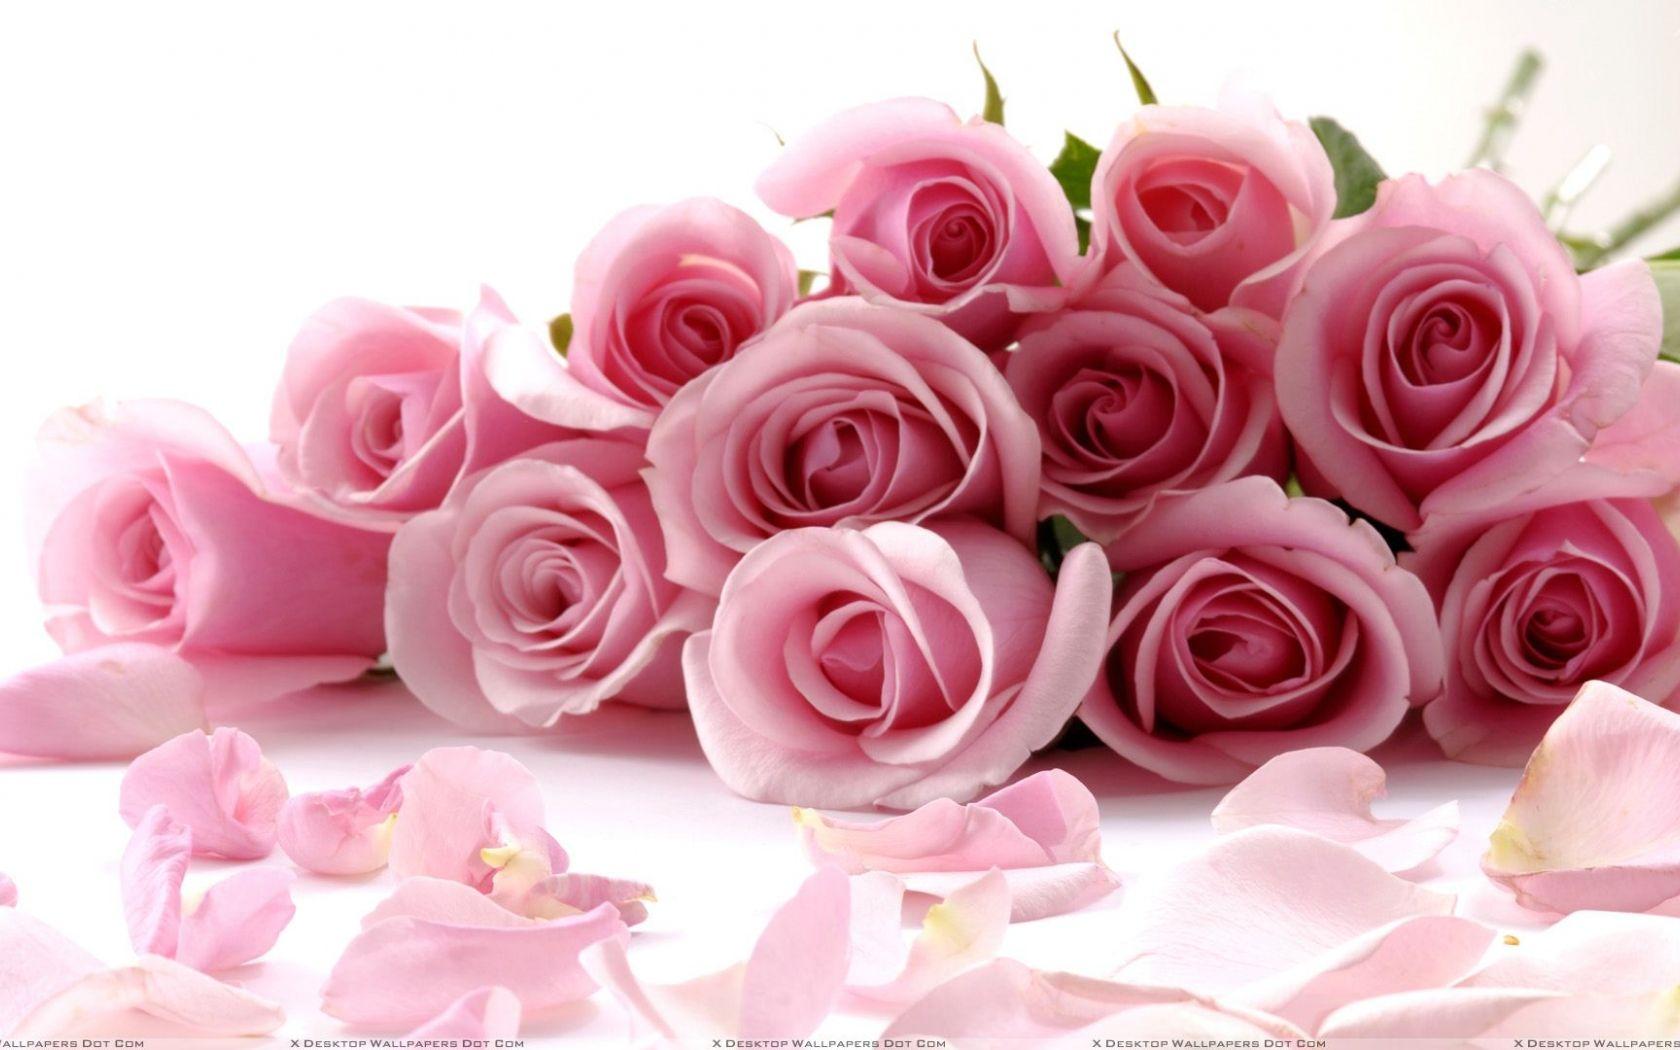 pink and white roses background